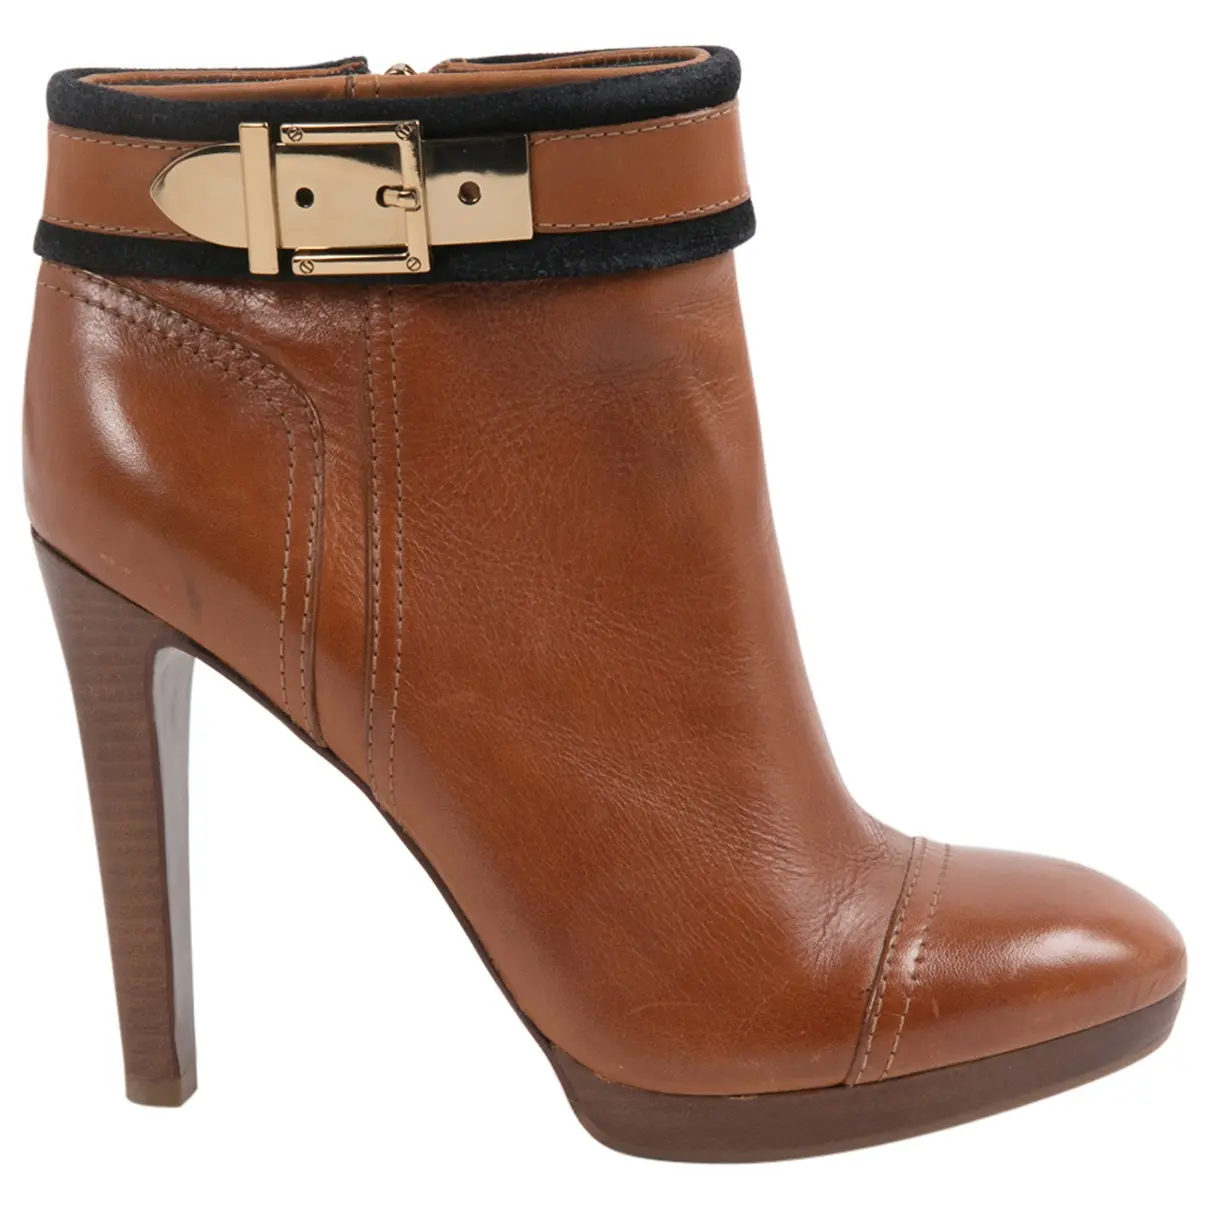 Leather buckled boots Tory Burch